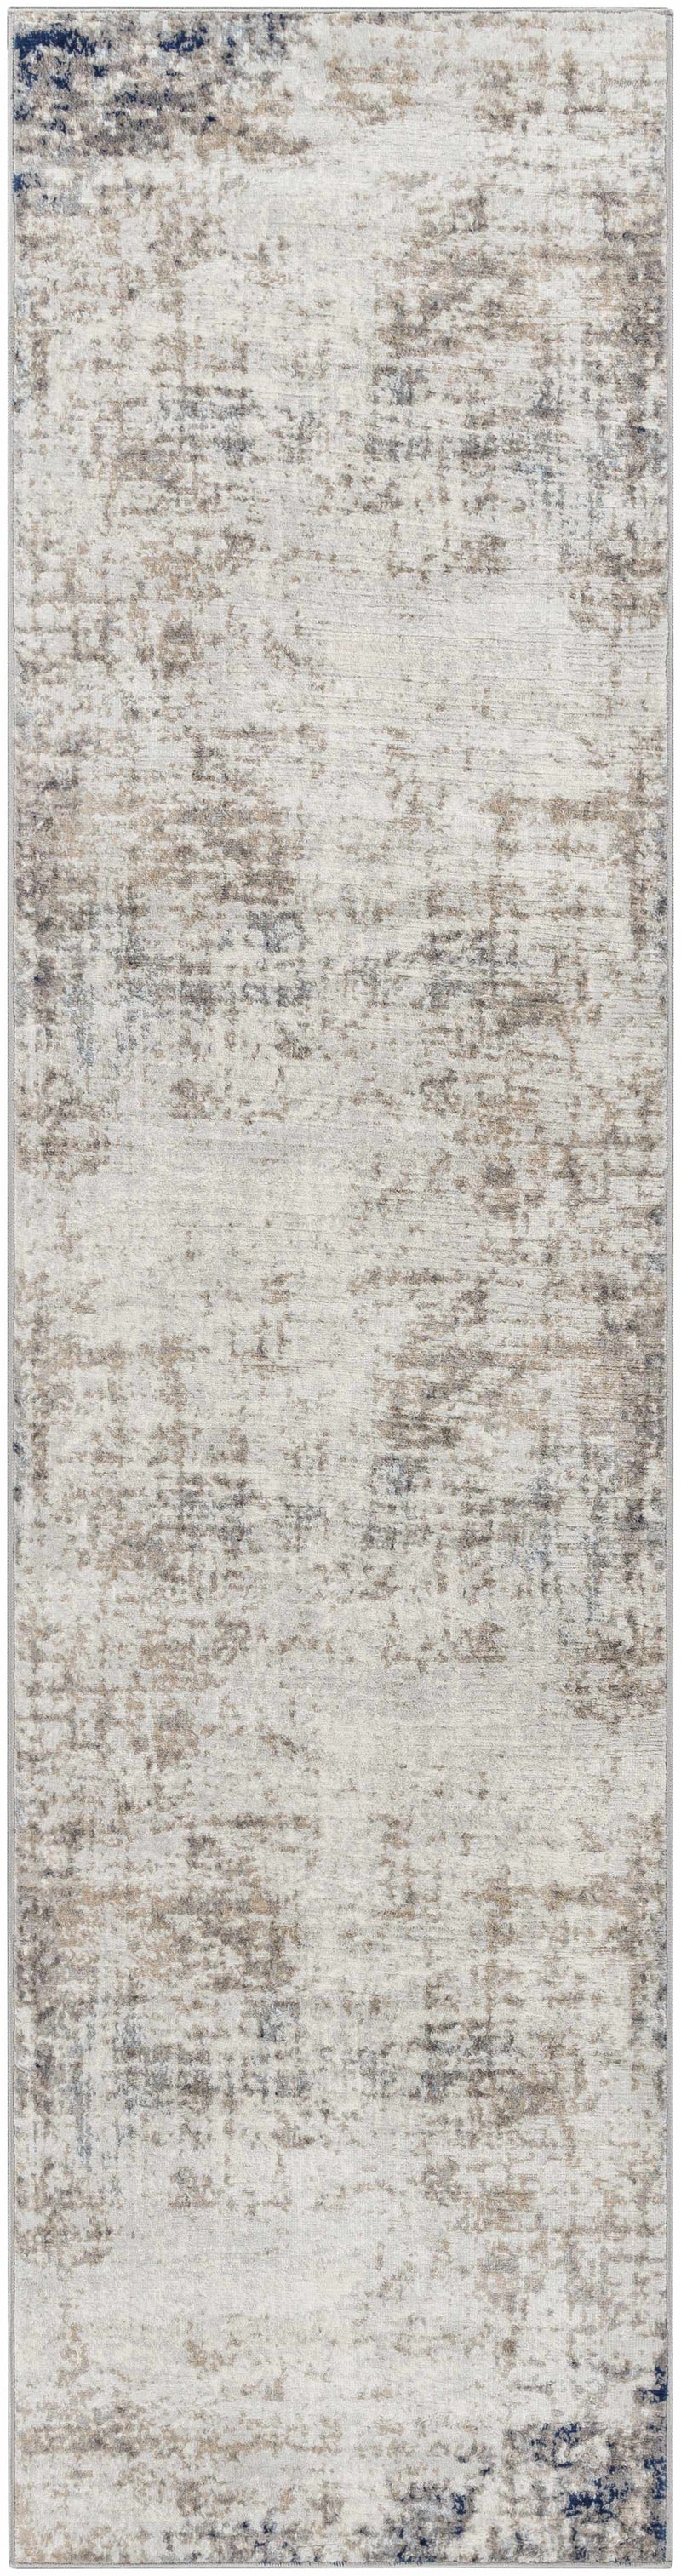 Alcove Abstract Area Rug Rugs Boutique Rugs 2'7" x 10' Runner 